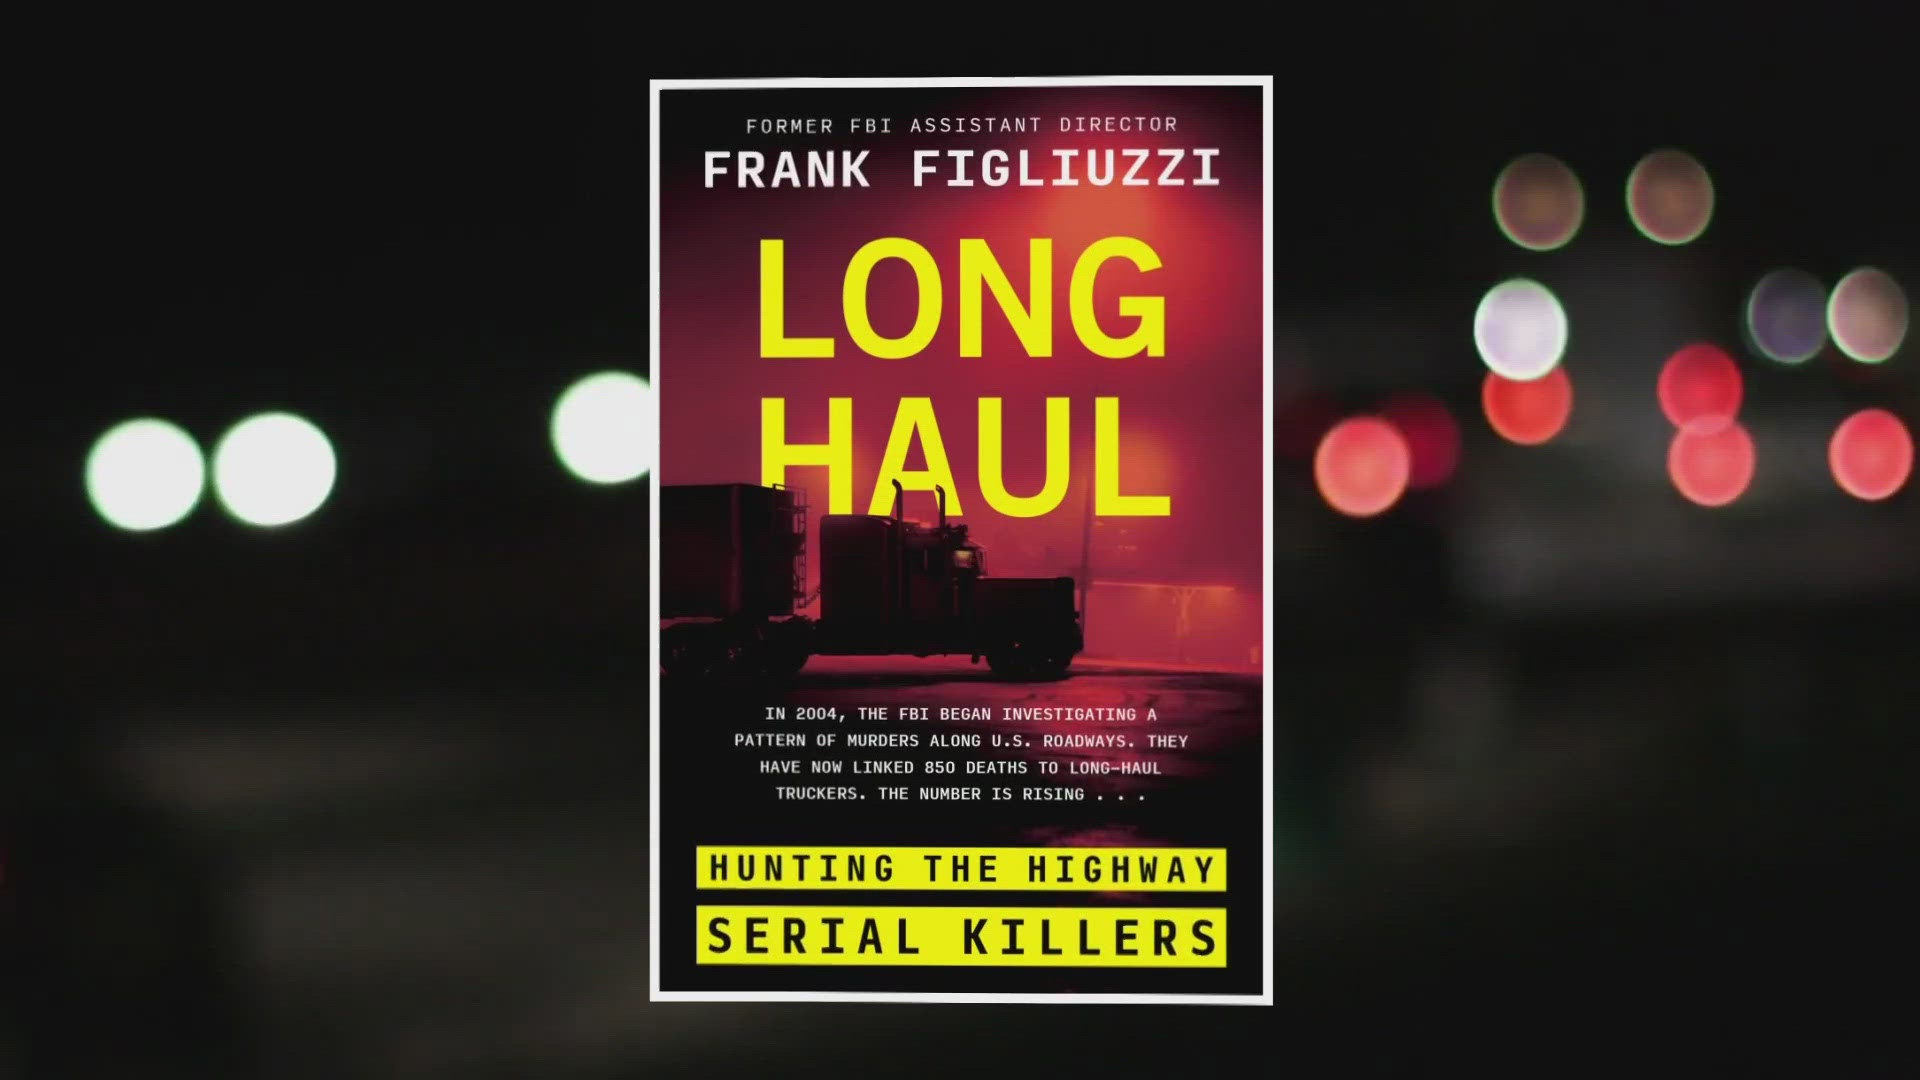 The book is titled “Long Haul: Hunting the Highway Serial Killers” and is written by former FBI Assistant Director Frank Figliuzzi.